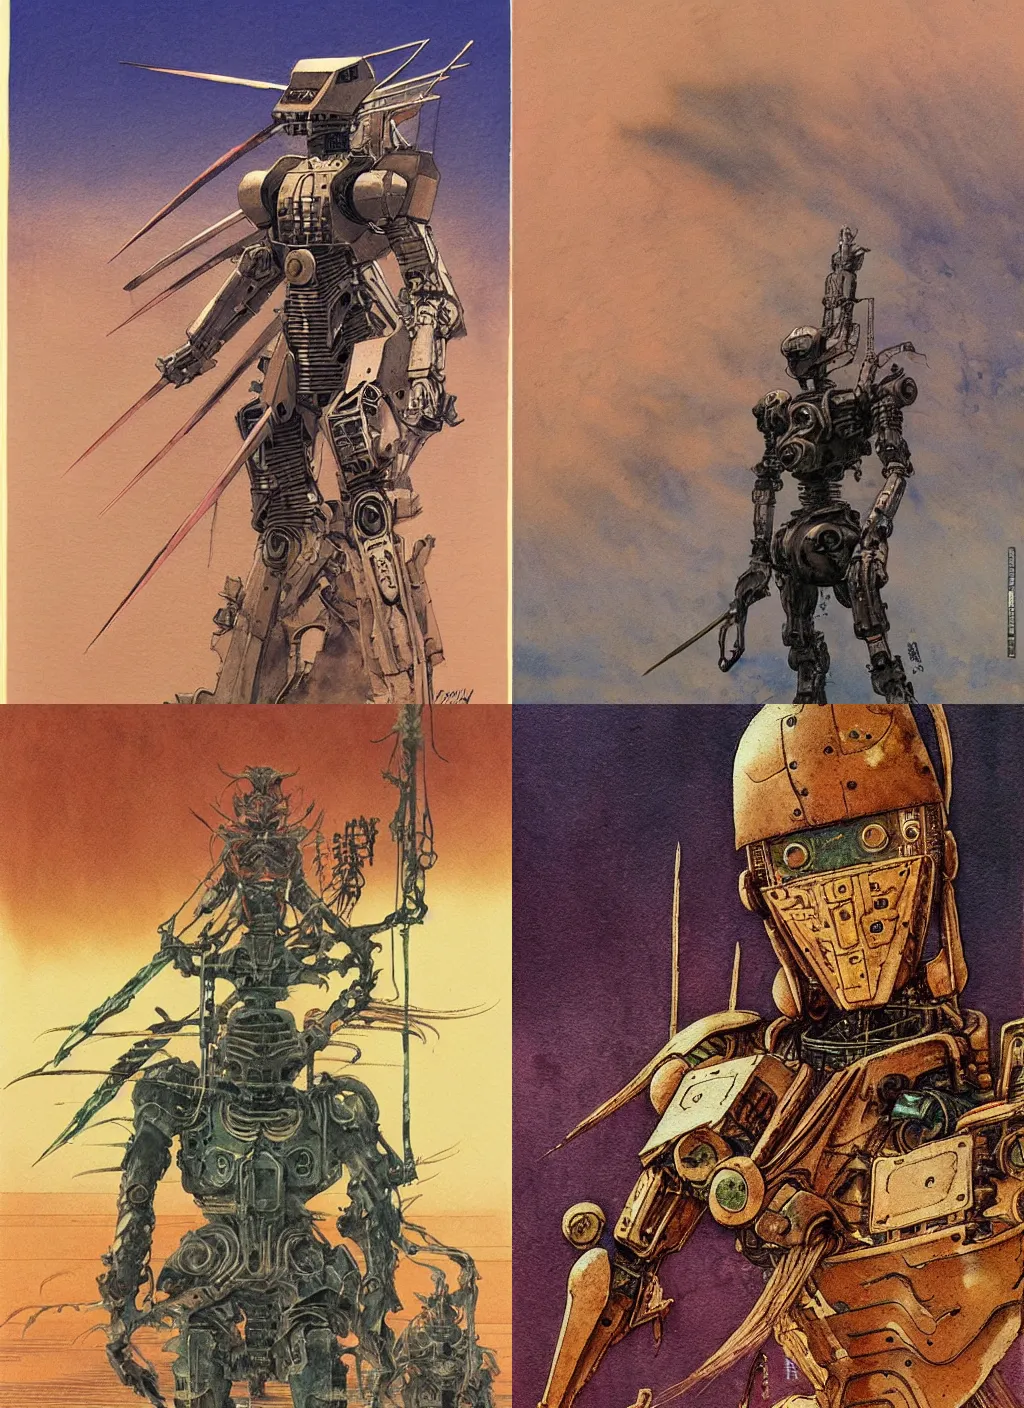 Prompt: vintage anime cinematic robot warrior by Zdzislaw beksinski, watercolor concept art by Syd Mead, by william herbert dunton, watercolor strokes, japanese woodblock, by Jean Giraud